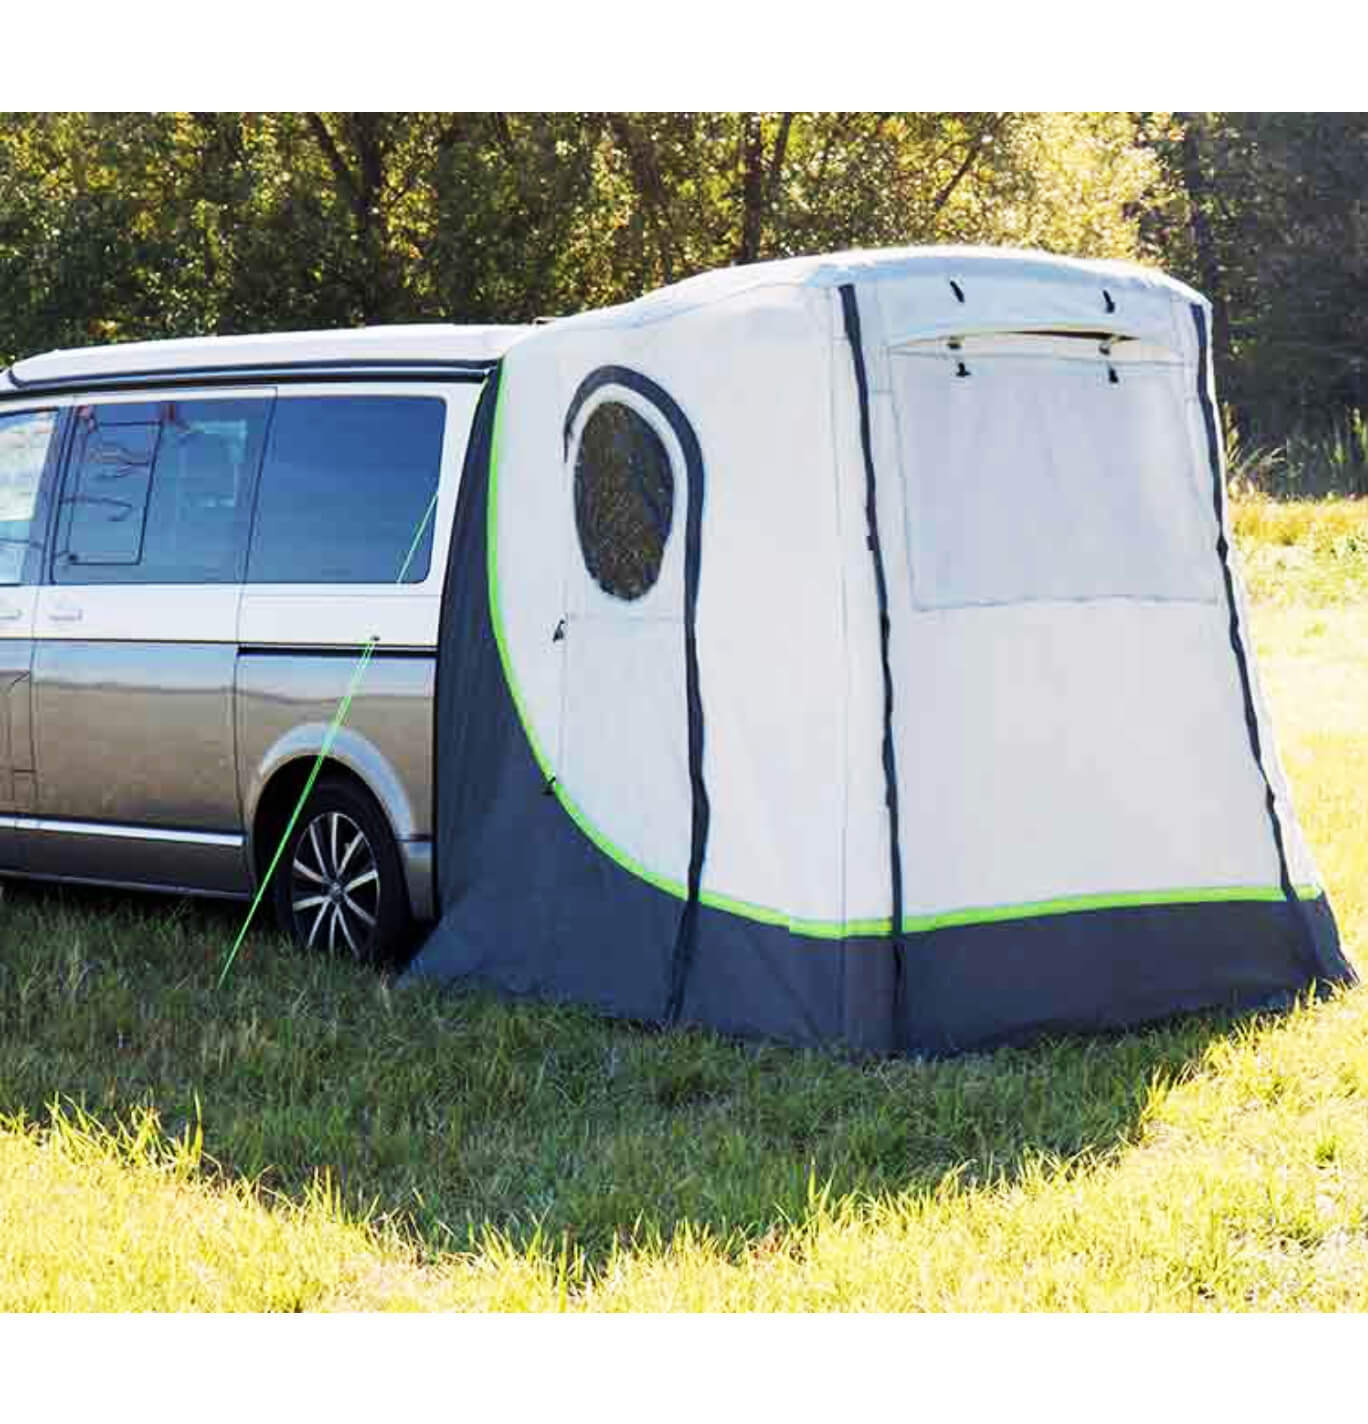 Camping Equipment for your VW T6.1, T6, T5 and other campervans mosquito net,  dish bag and more